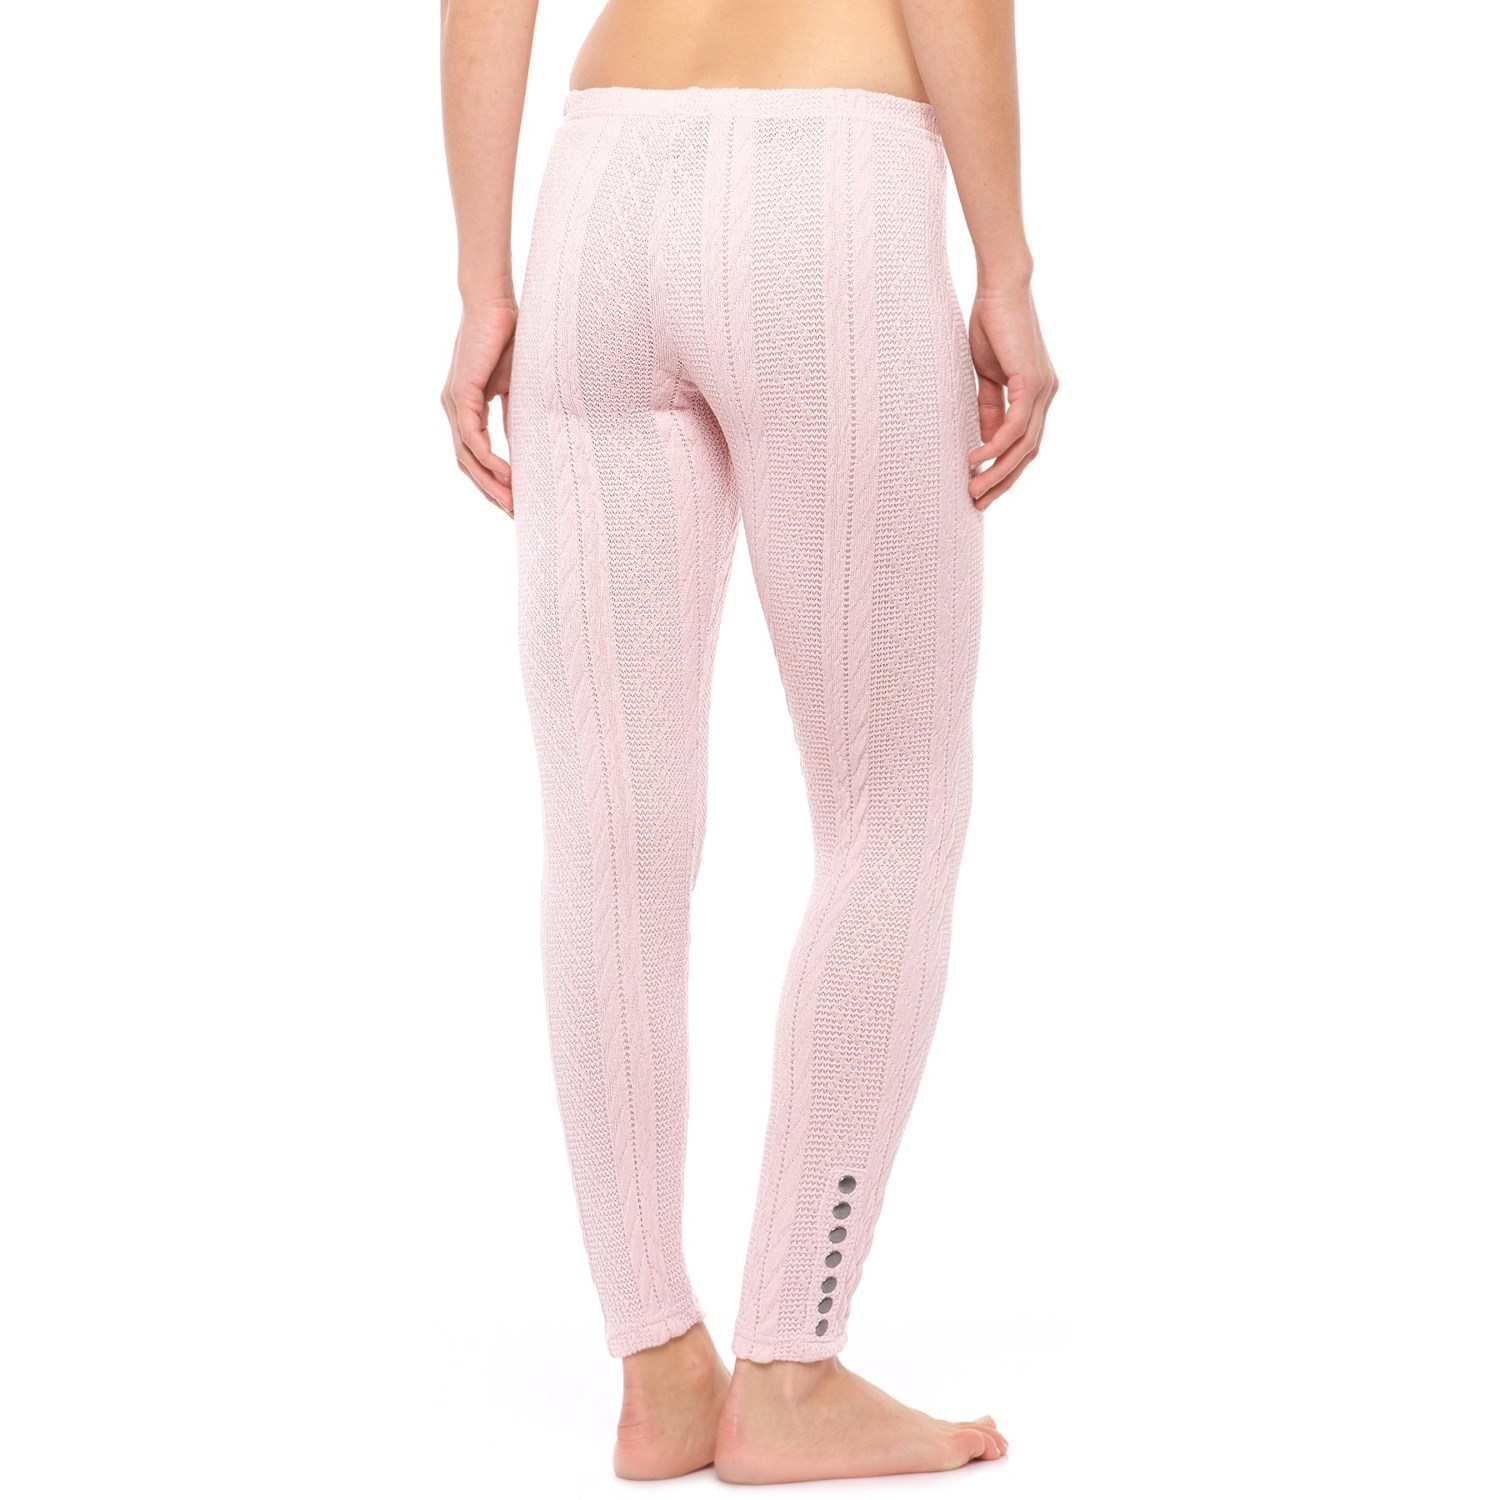 cable knit leggings anew sleepy cable-knit leggings (for women) mhxcvxo